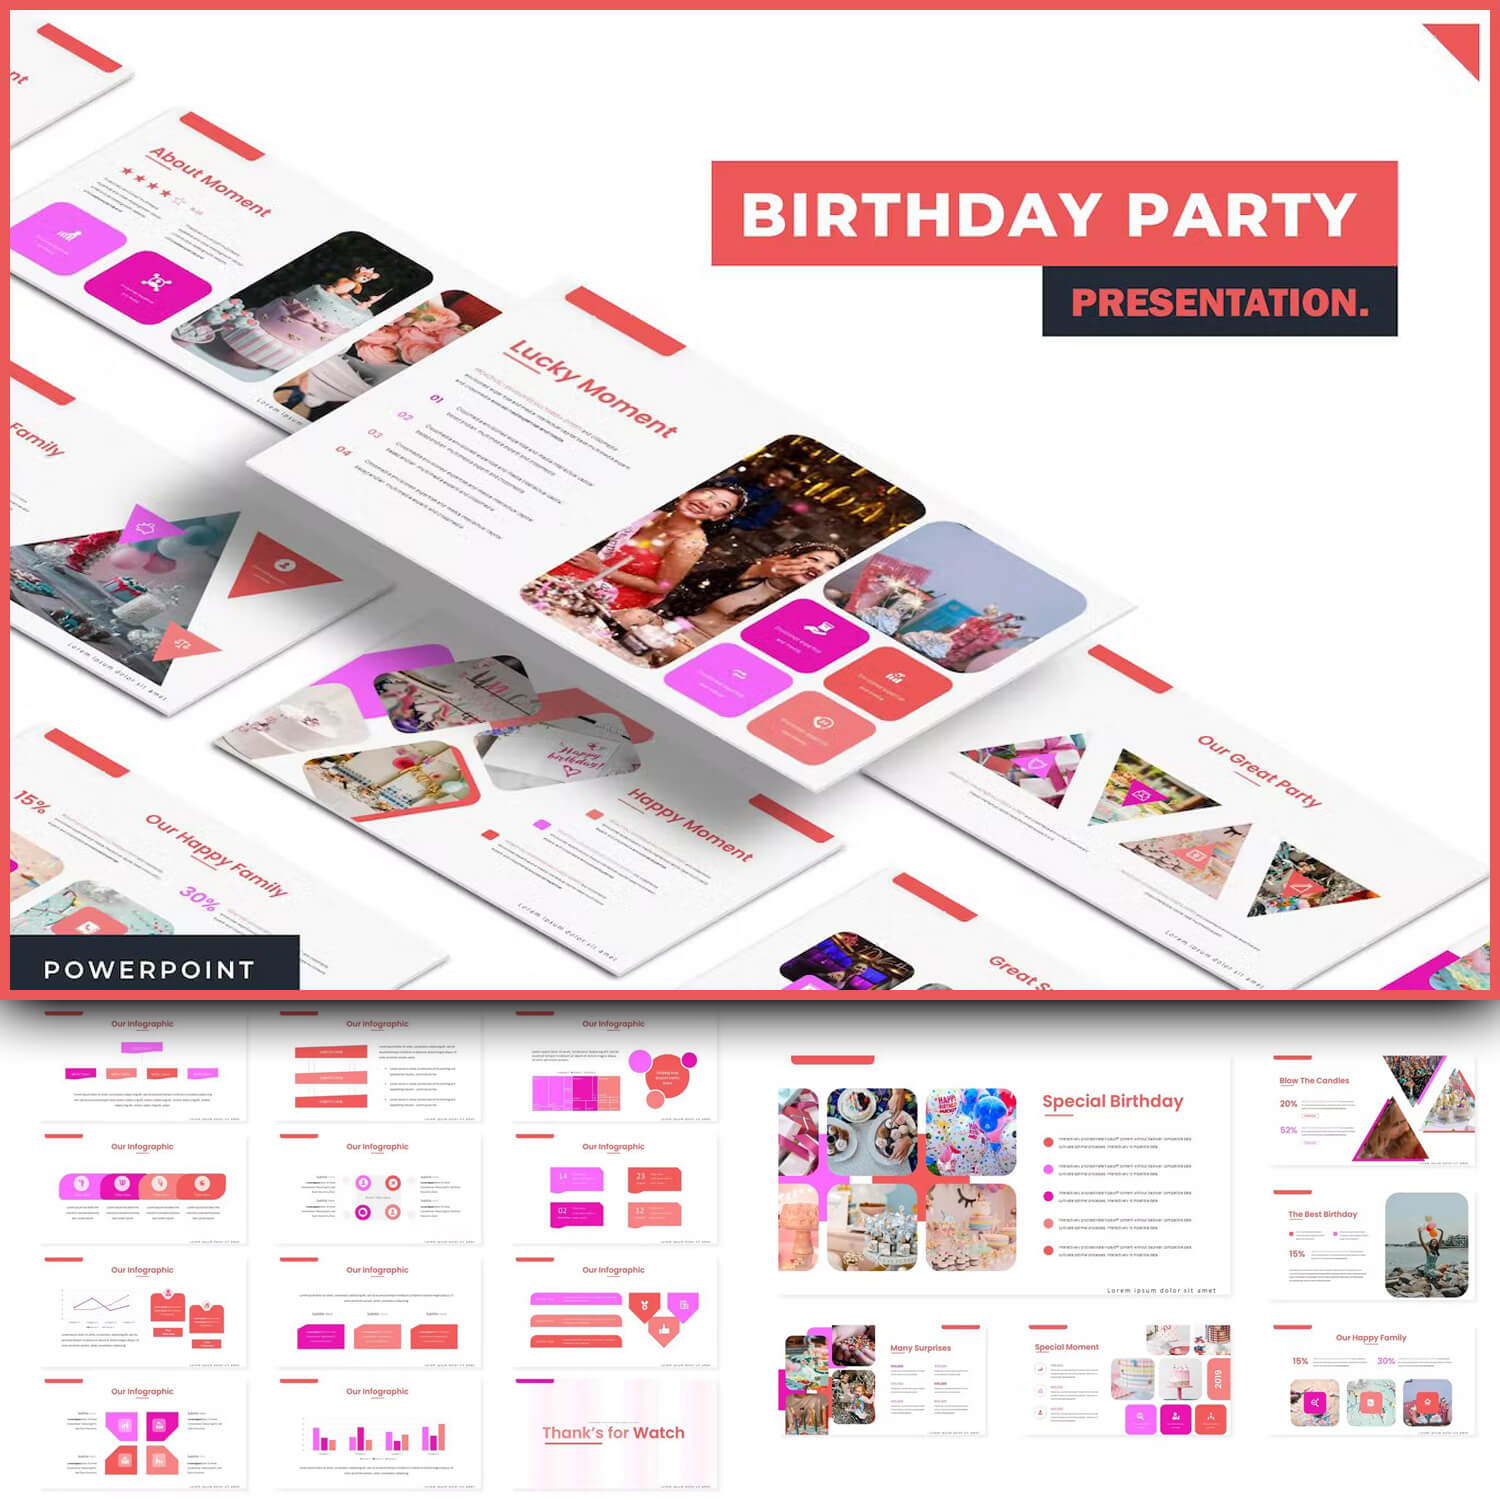 Lucky moment of Birthday Party - Powerpoint Template.